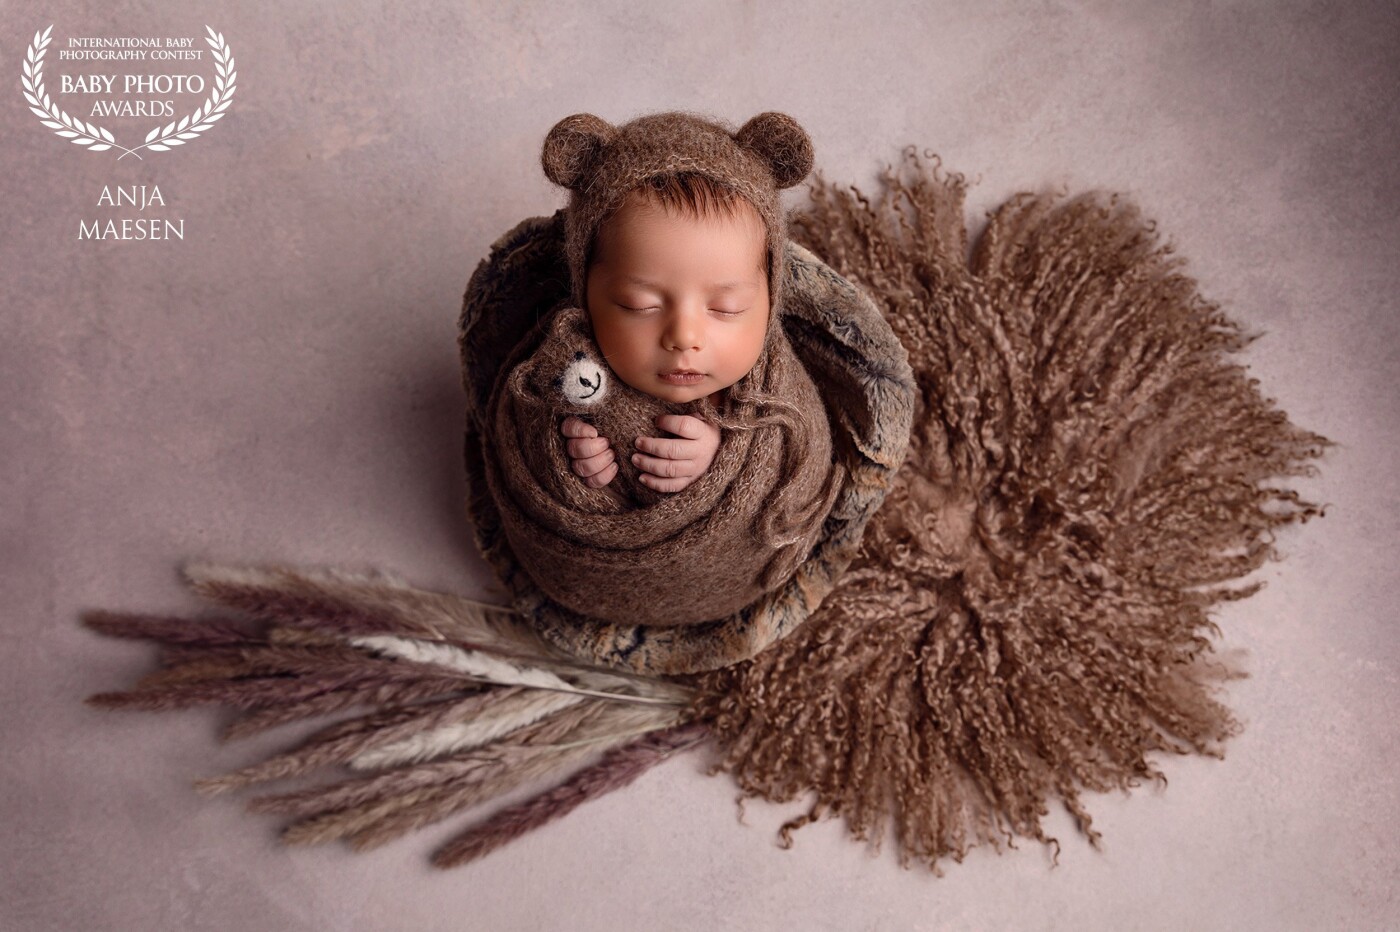 This is little Tudor at 12 days old. I really love the simplicity in this picture combined with the beauty of the baby...The natural colors in this picture are so flattering and make the baby stand out beautifully.